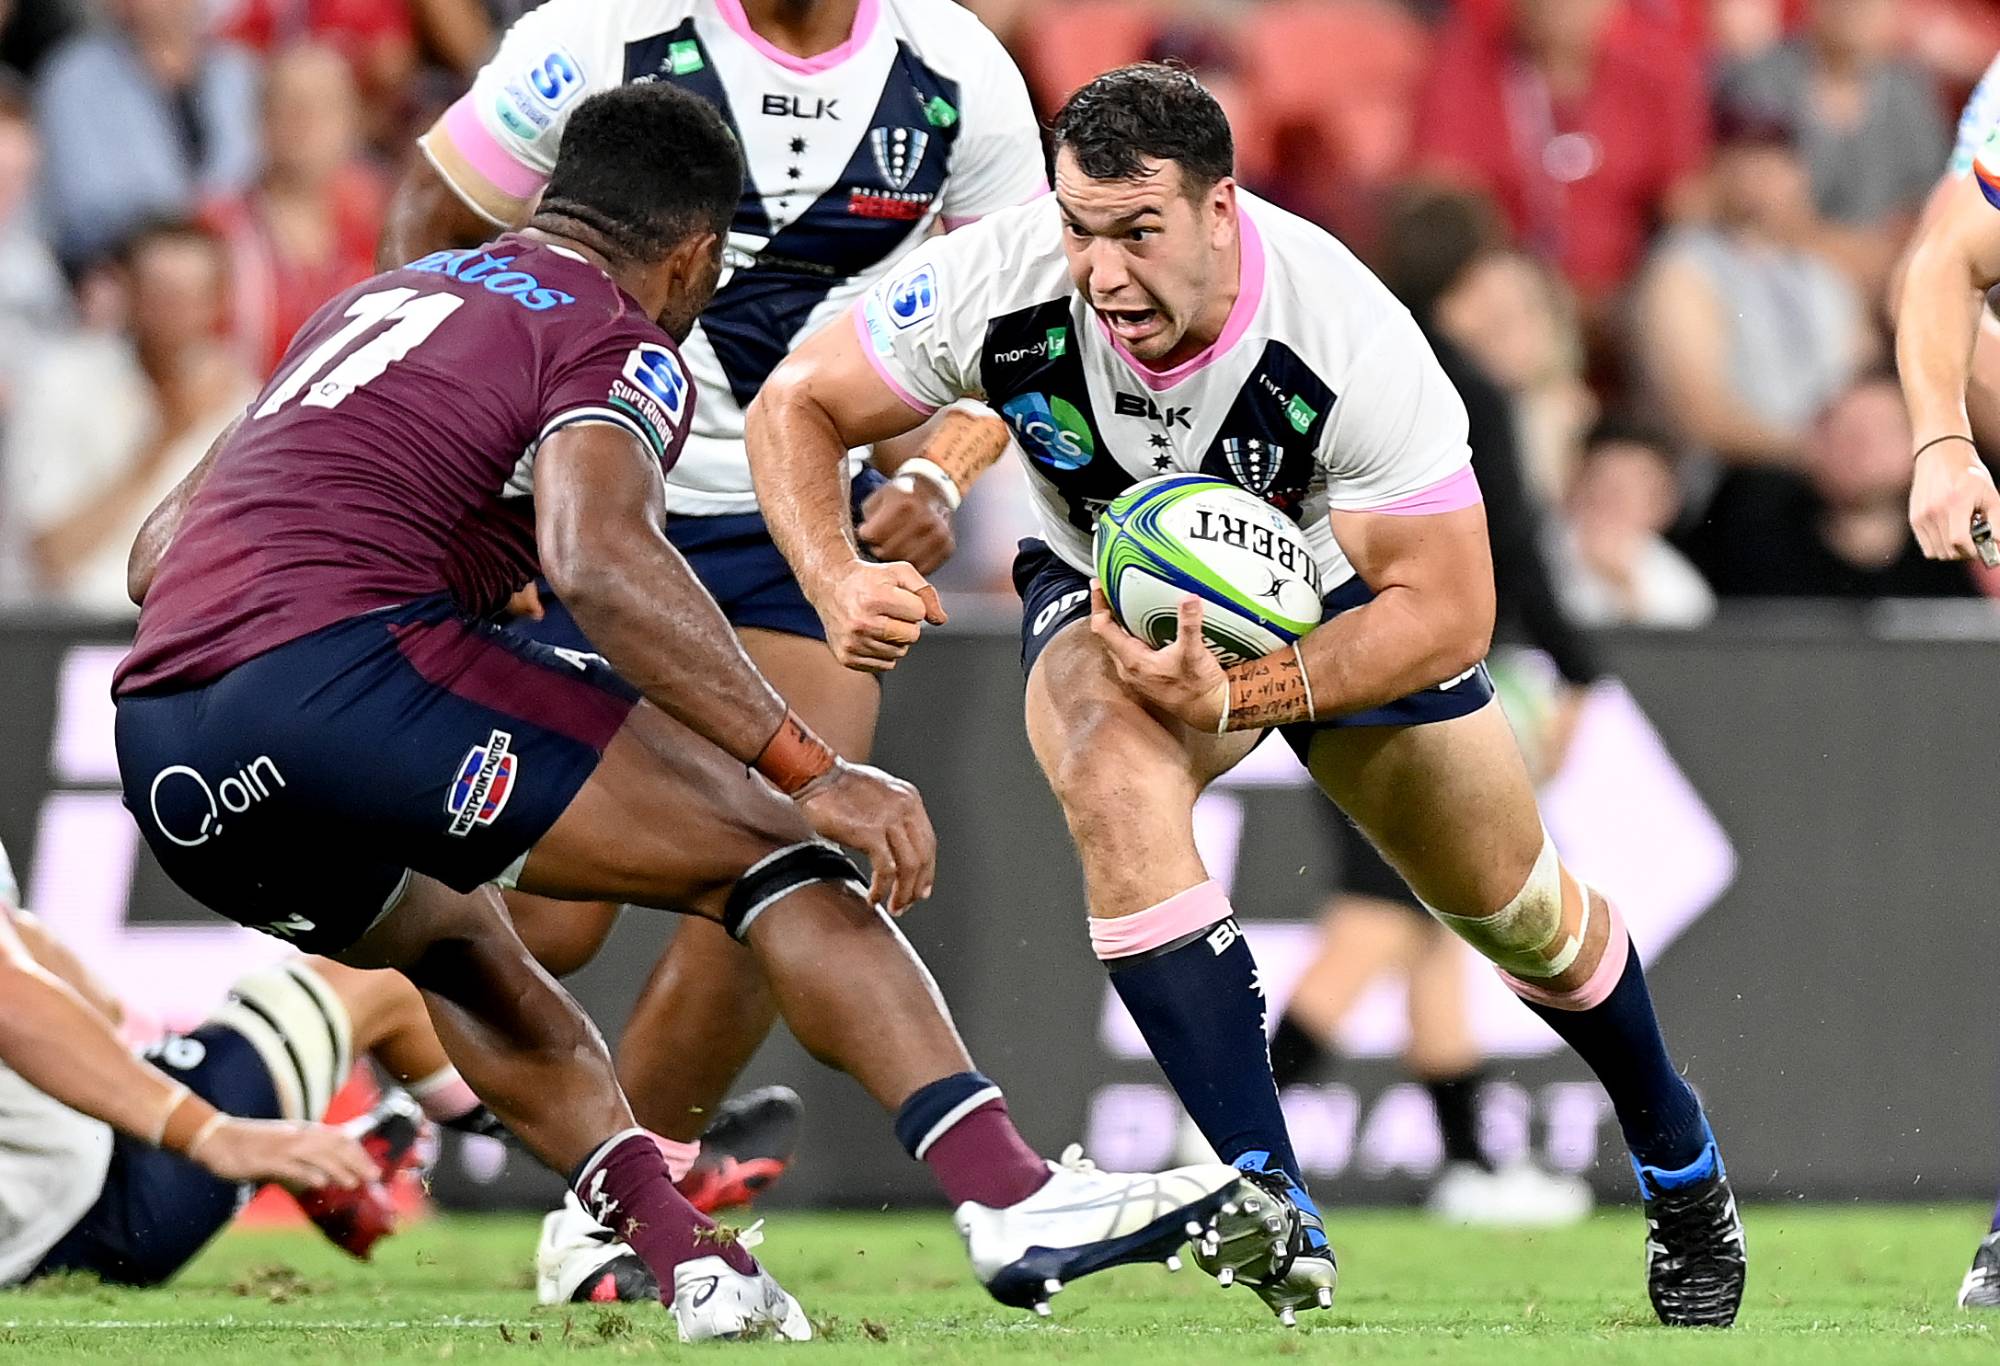 Ed Craig of the Melbourne Rebels takes on the defence during the round two Super Rugby AU match between the Melbourne Rebels and the Queensland Reds at Suncorp Stadium, on February 26, 2021, in Brisbane, Australia. (Photo by Bradley Kanaris/Getty Images